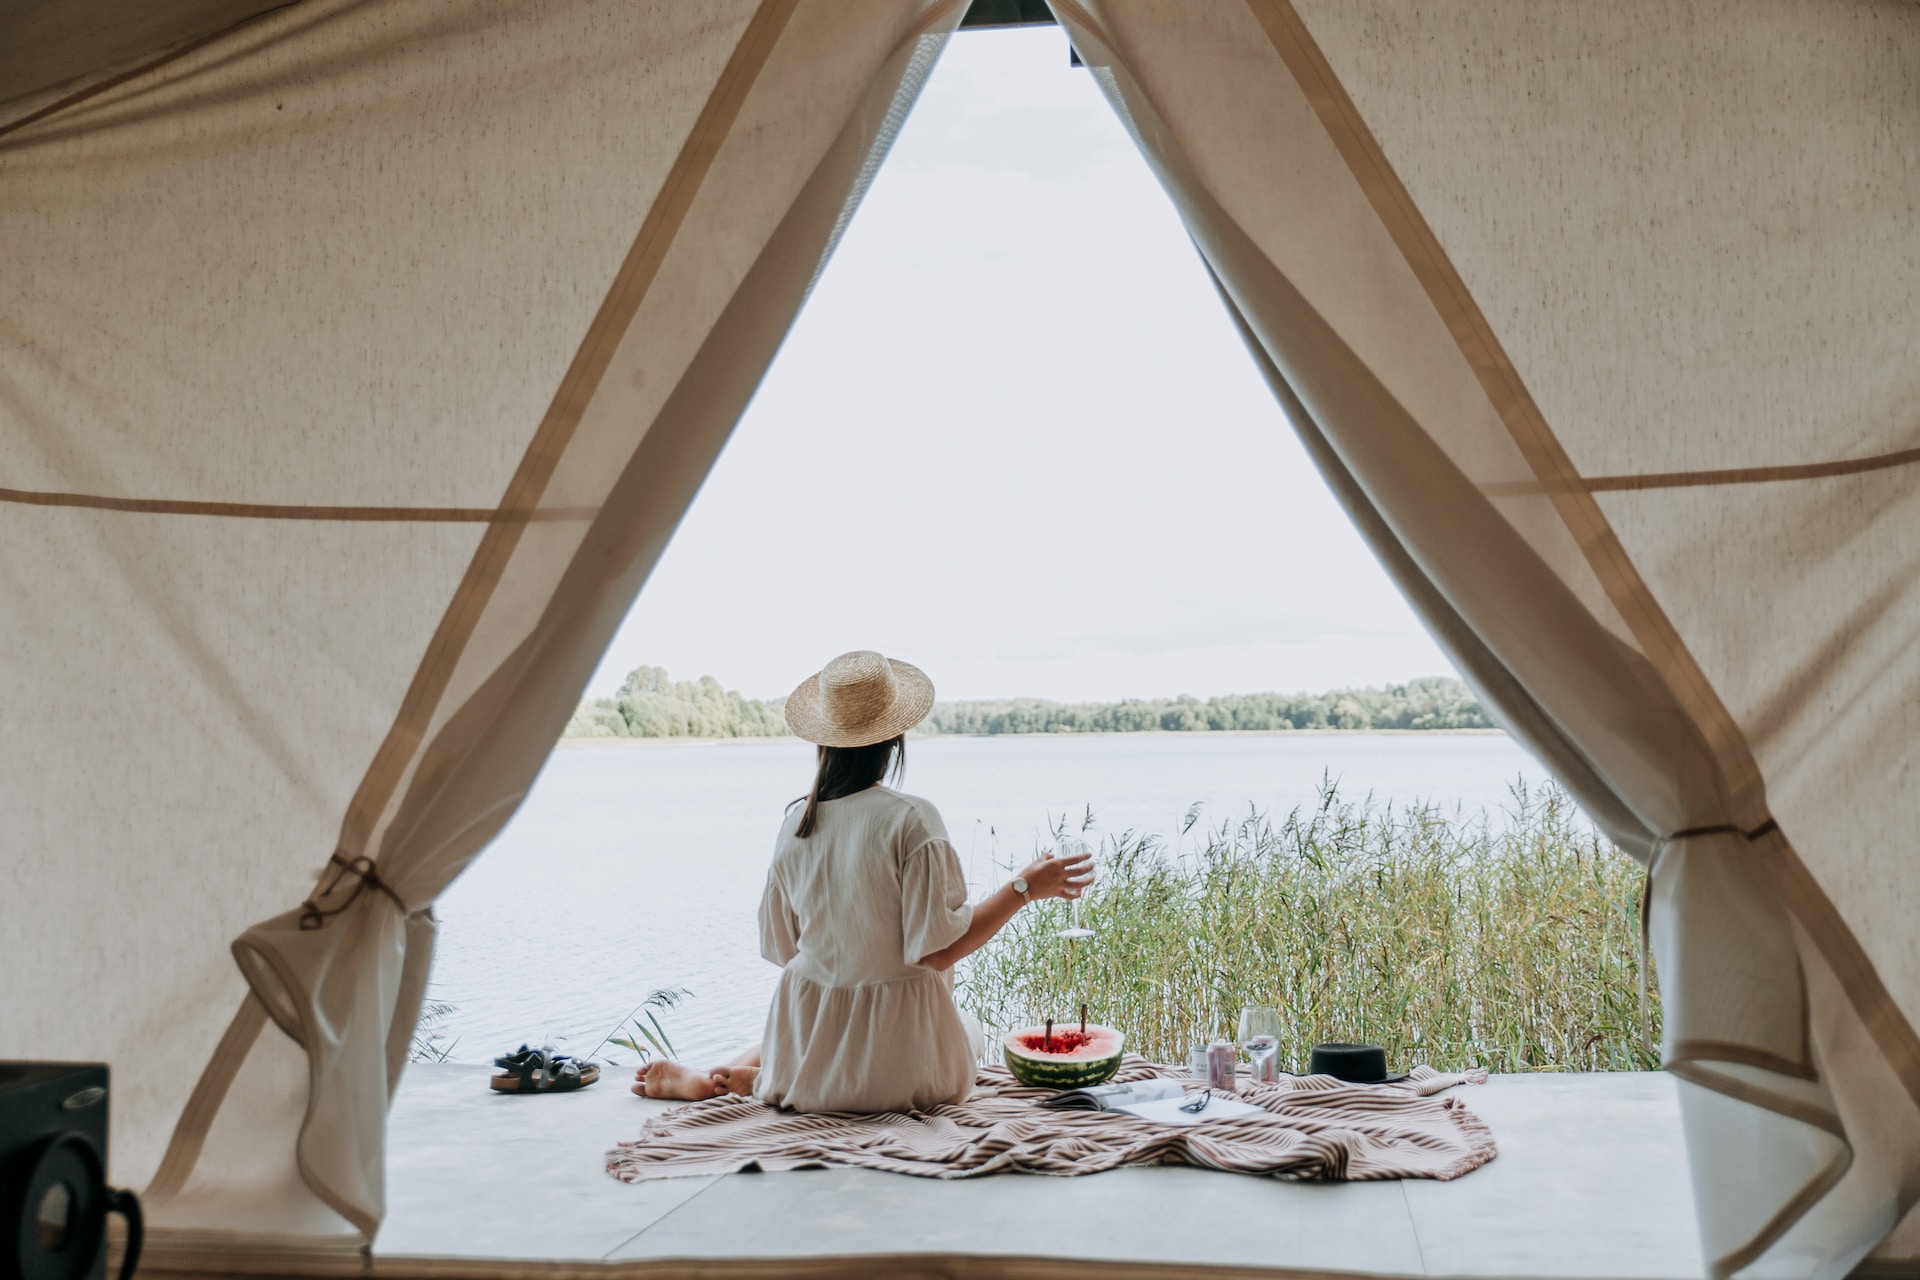 Why Most Glamping Products Are Not Eco-Friendly or Environmentally Sustainable